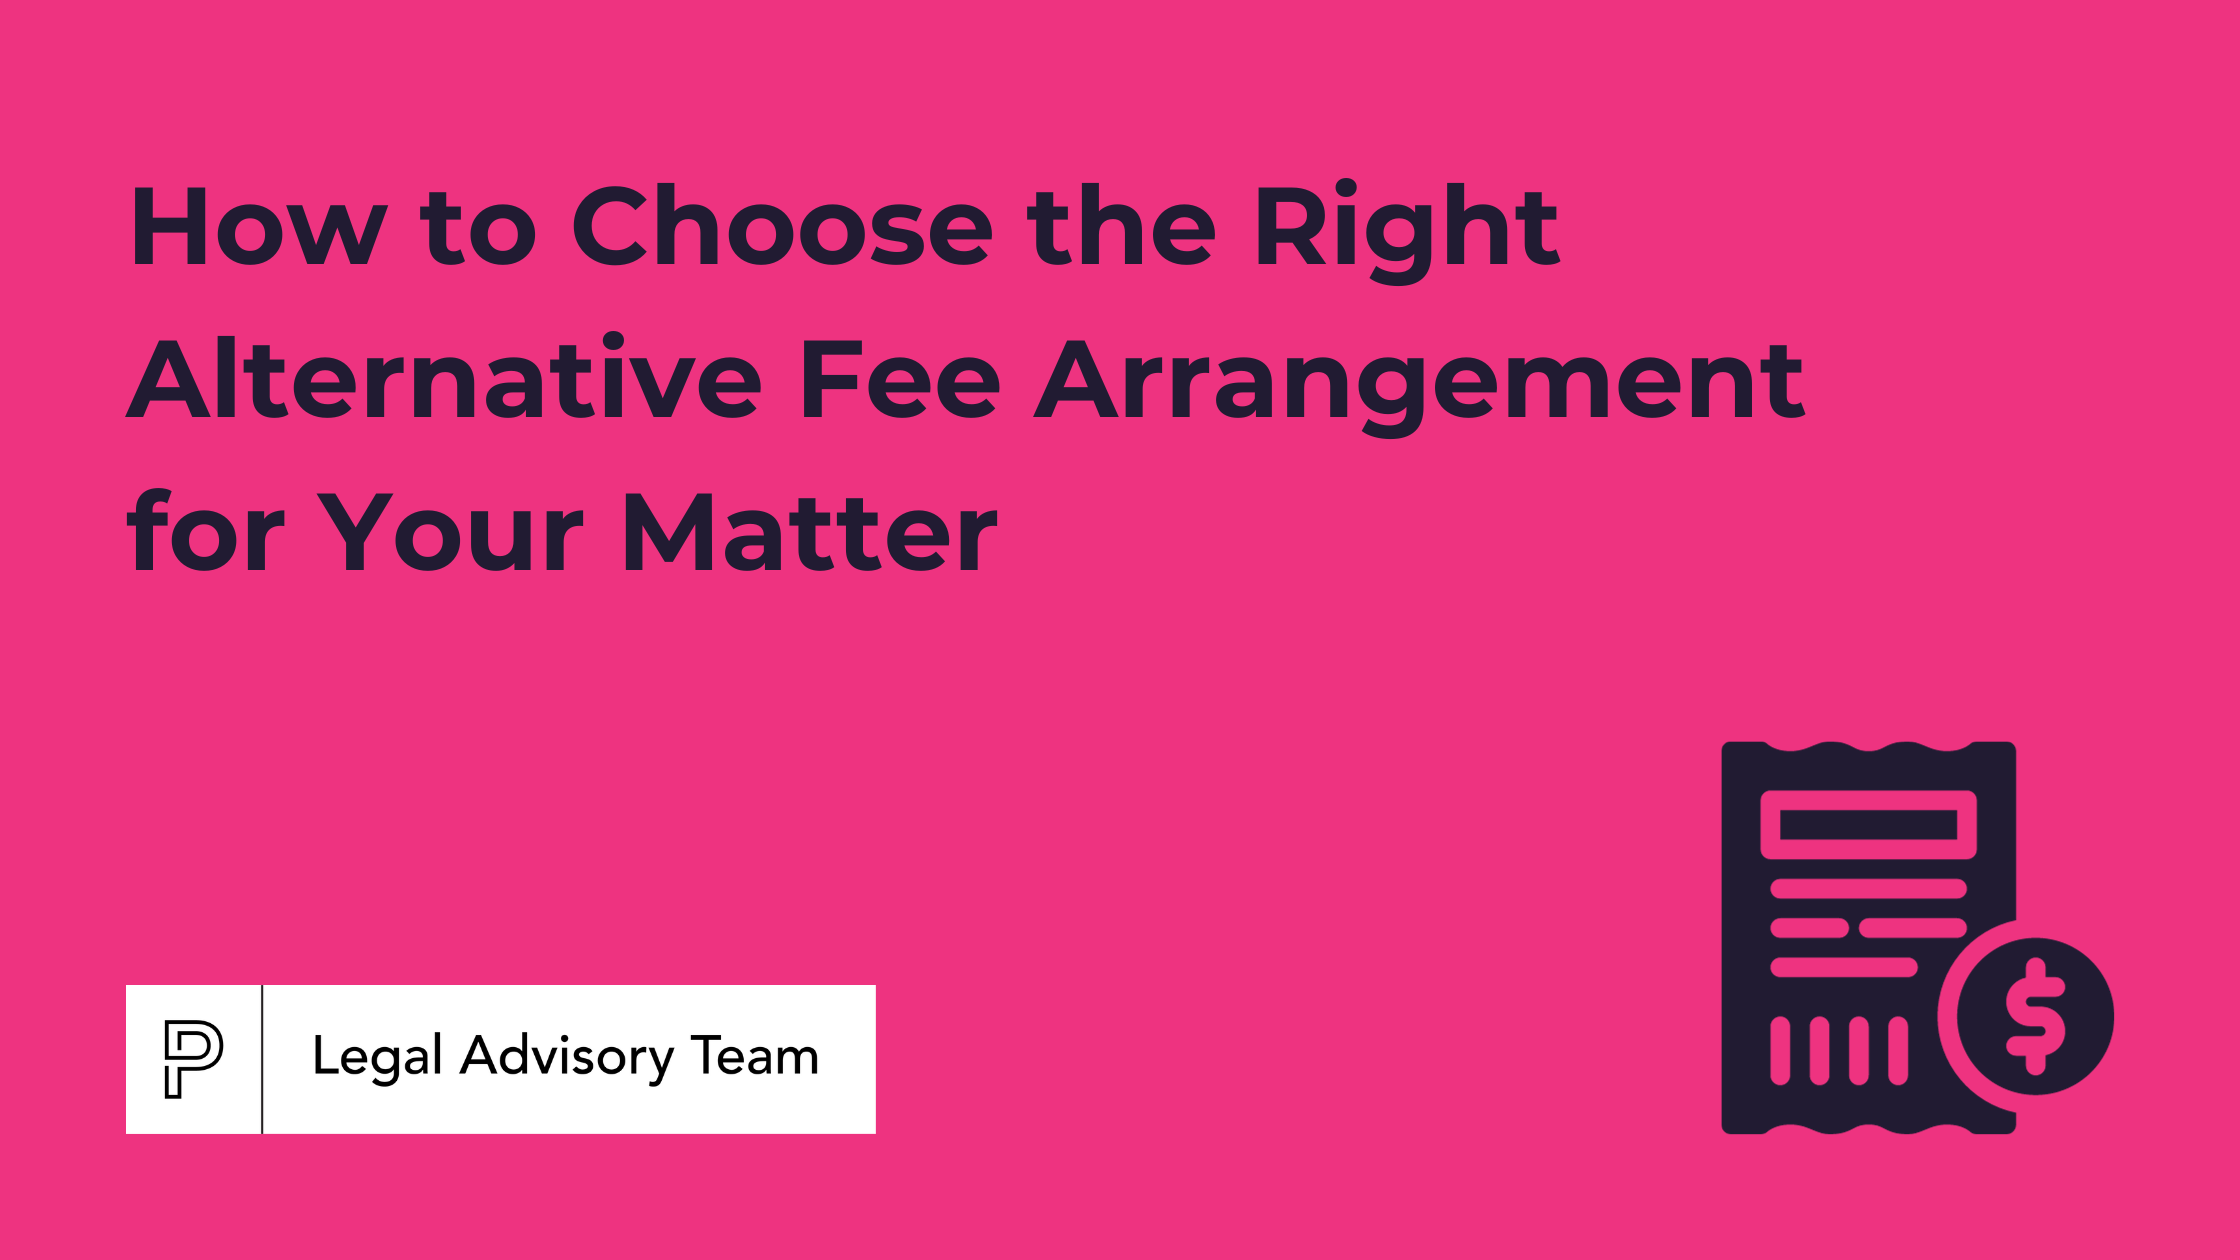 How to Choose the Right Alternative Fee Arrangement for Your Matter